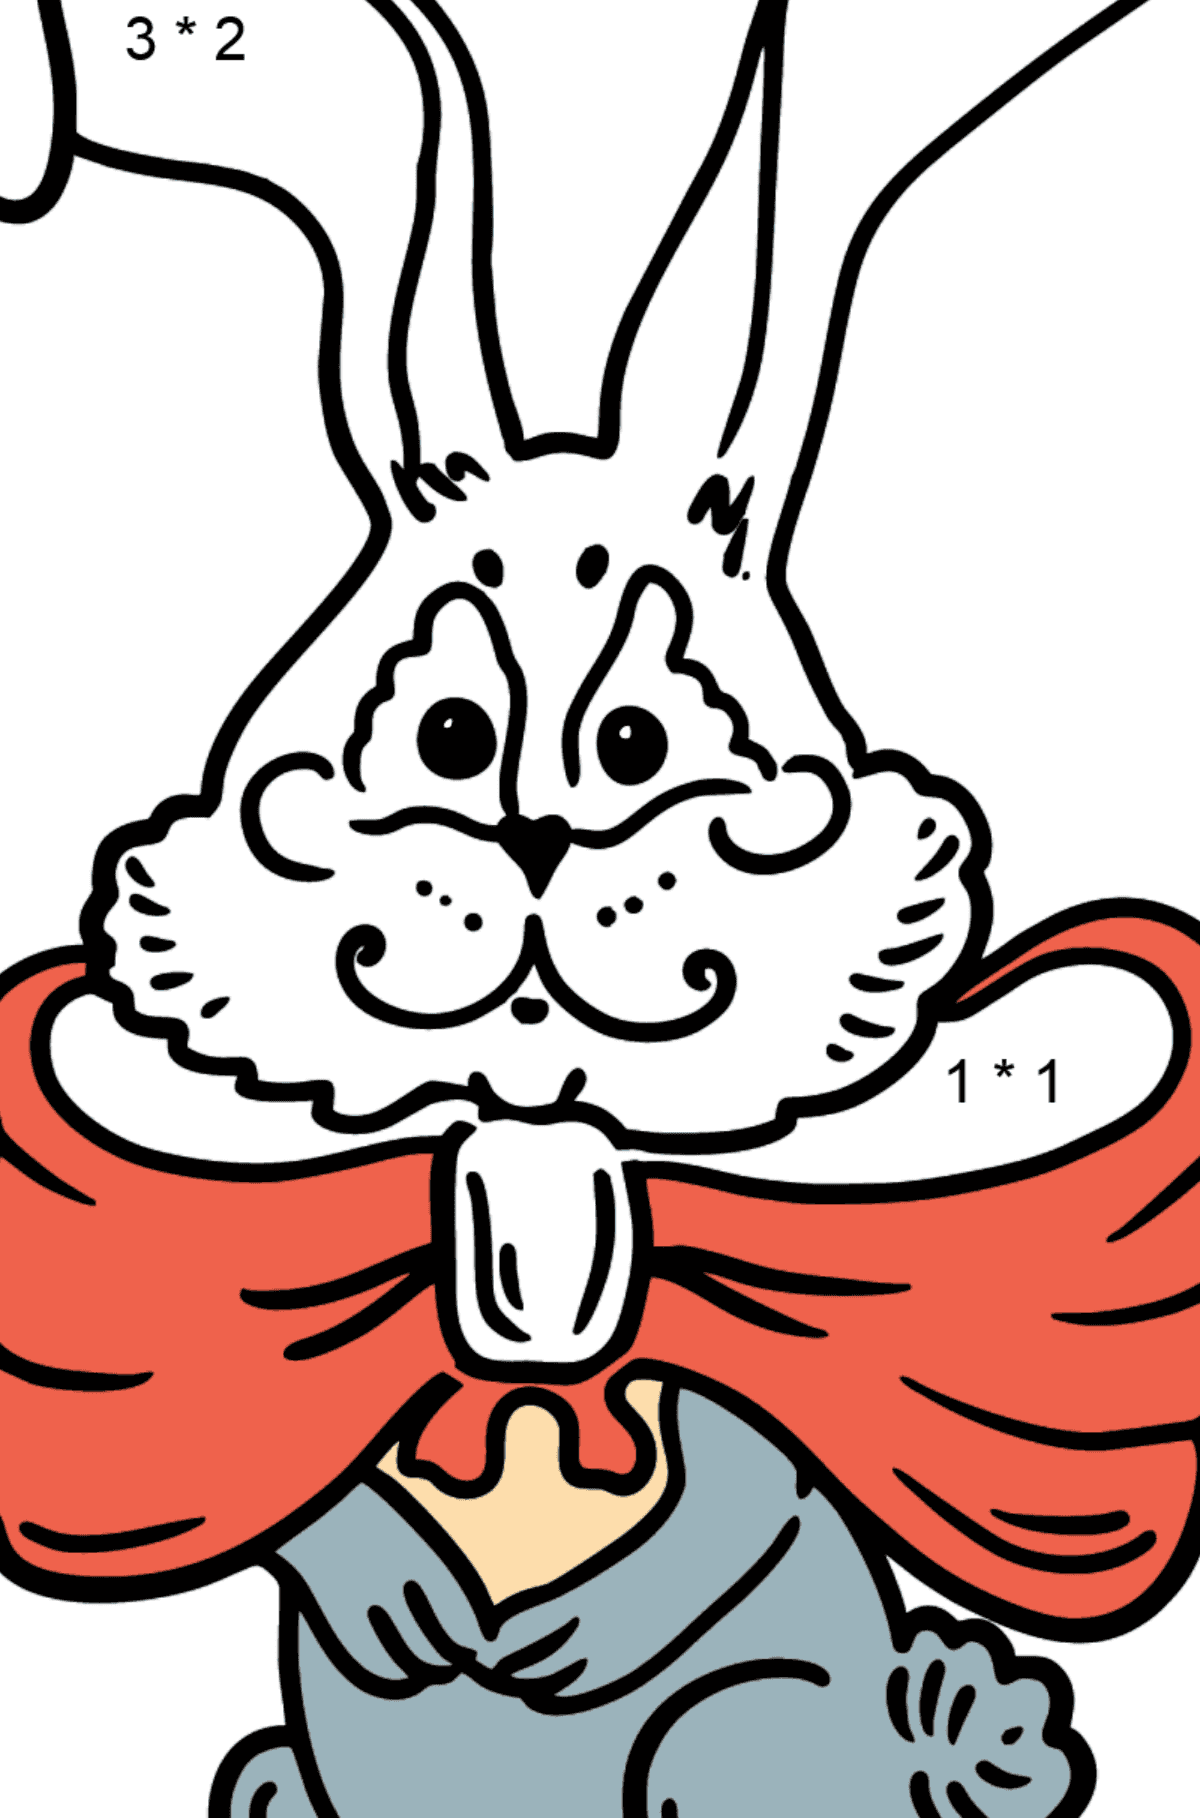 Bunny with a Bow coloring page - Math Coloring - Multiplication for Kids